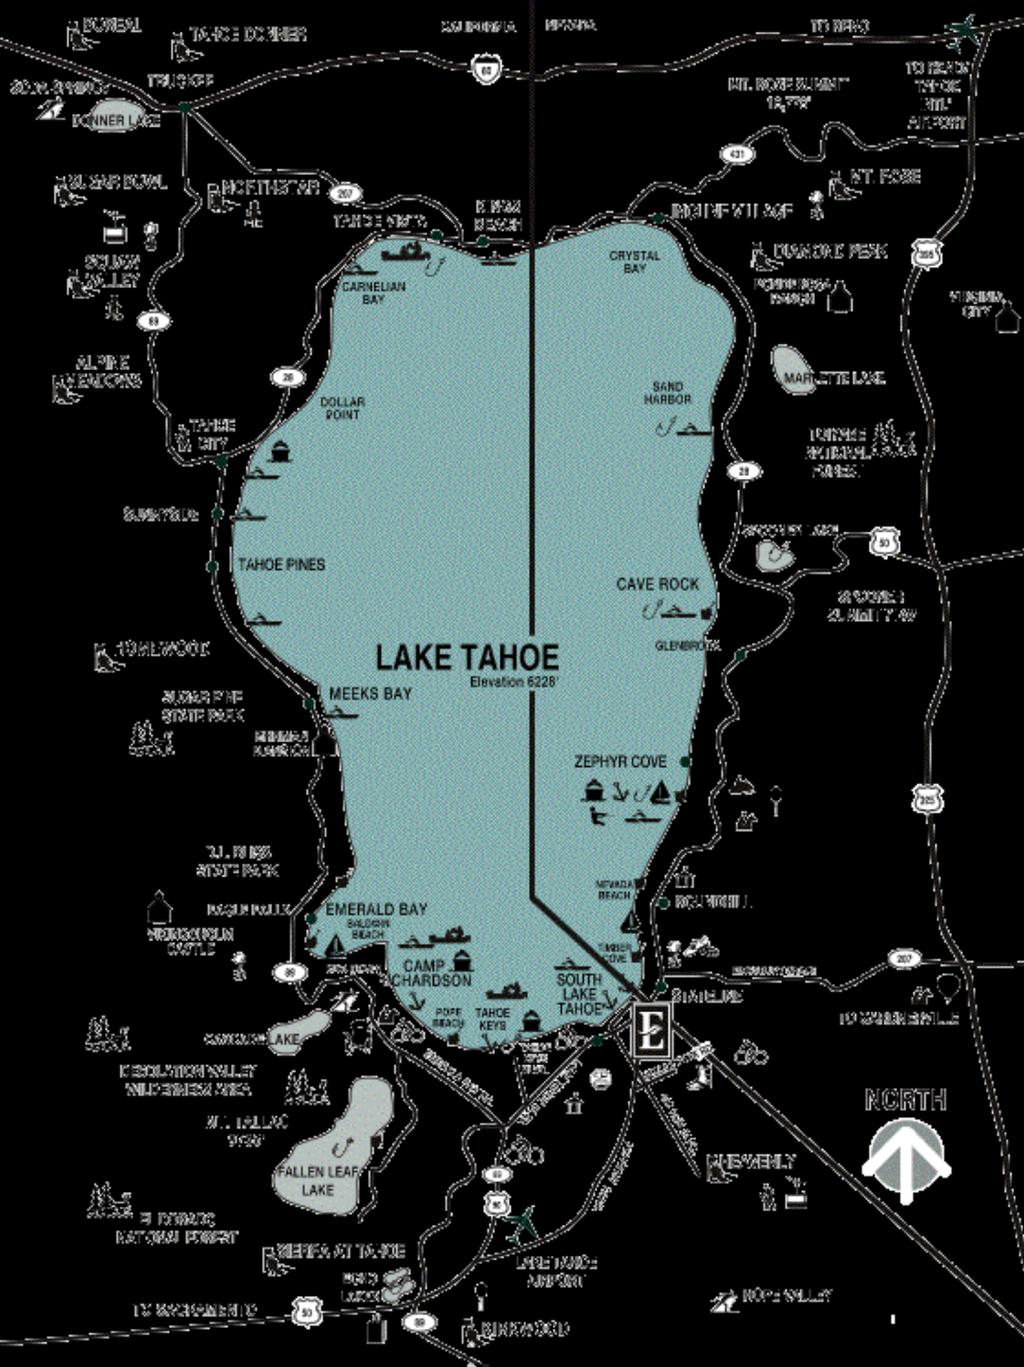 South Tahoe Express provides worry-free year-round transportation, with non-stop service from Reno/Tahoe International Airport to South Lake Tahoe.